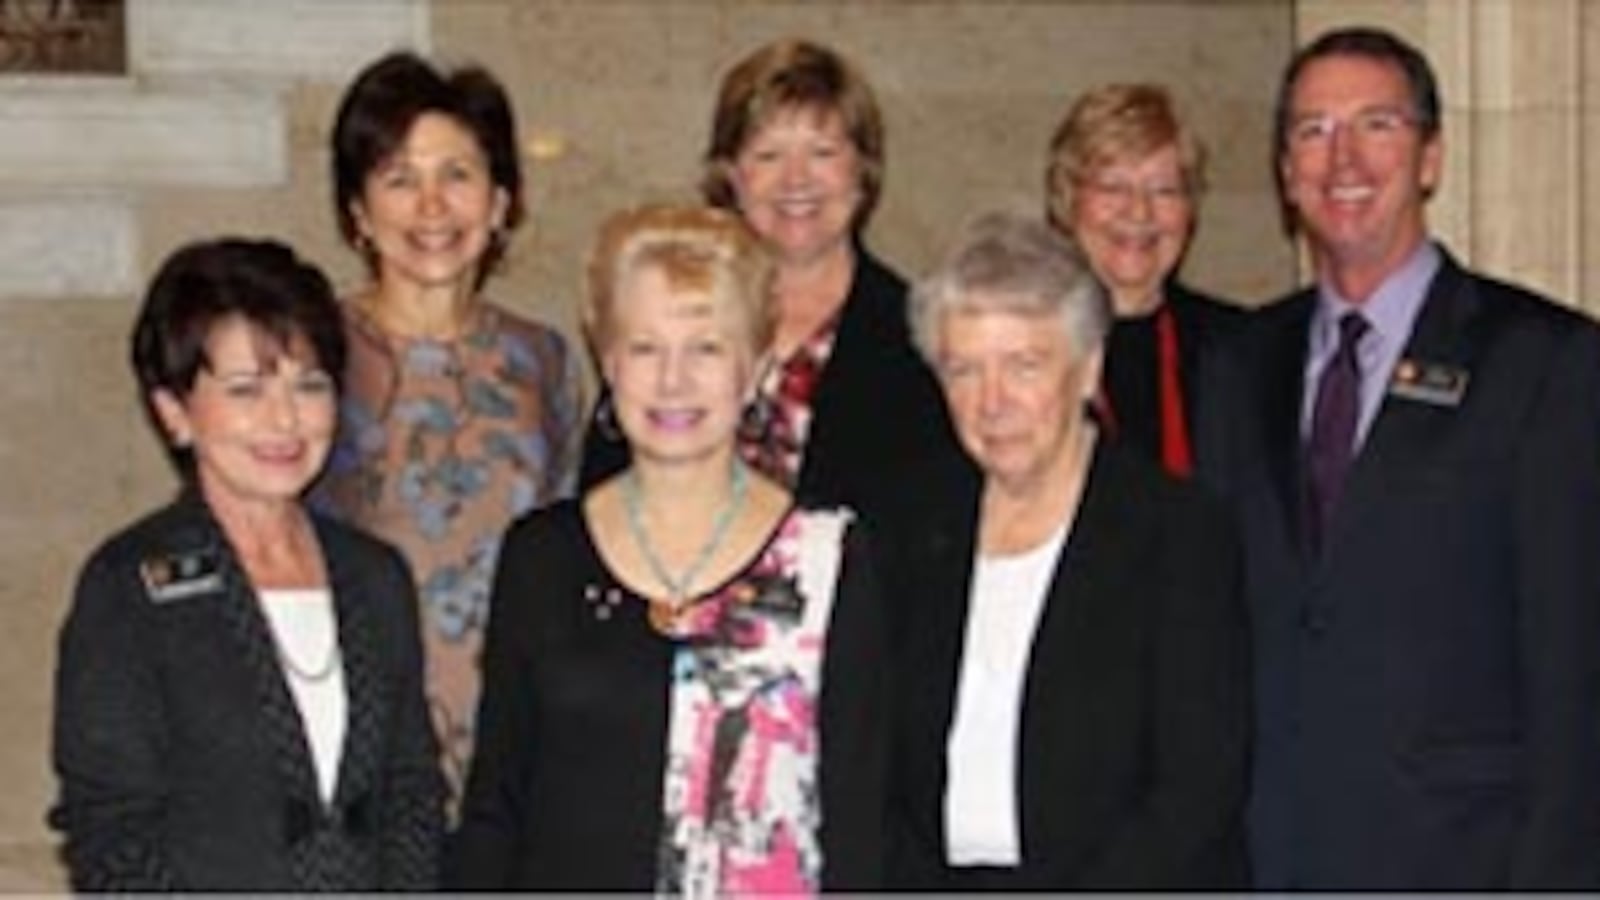 The State Board of Education's smiling official photo